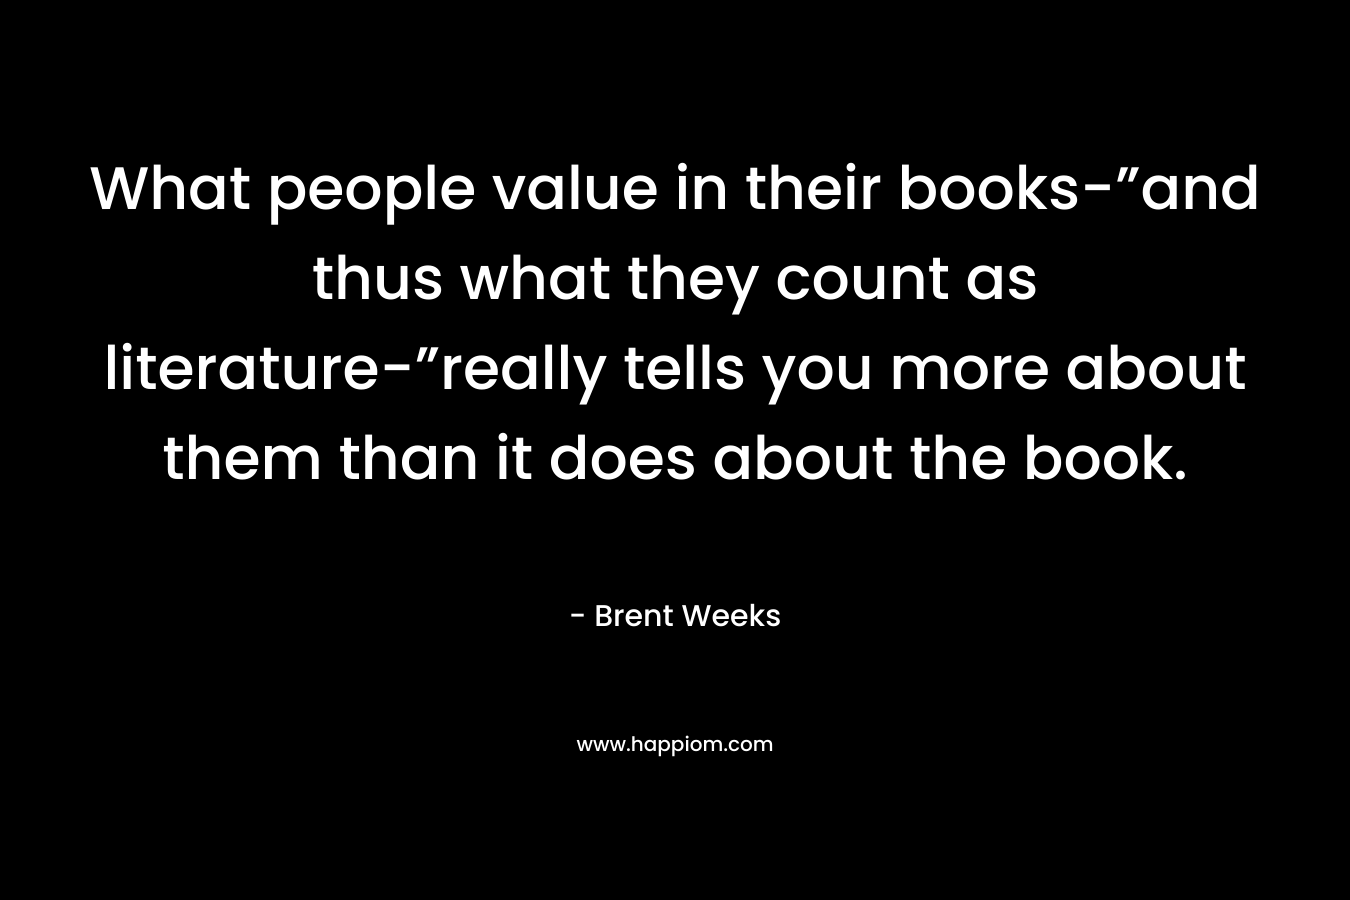 What people value in their books-”and thus what they count as literature-”really tells you more about them than it does about the book. – Brent Weeks